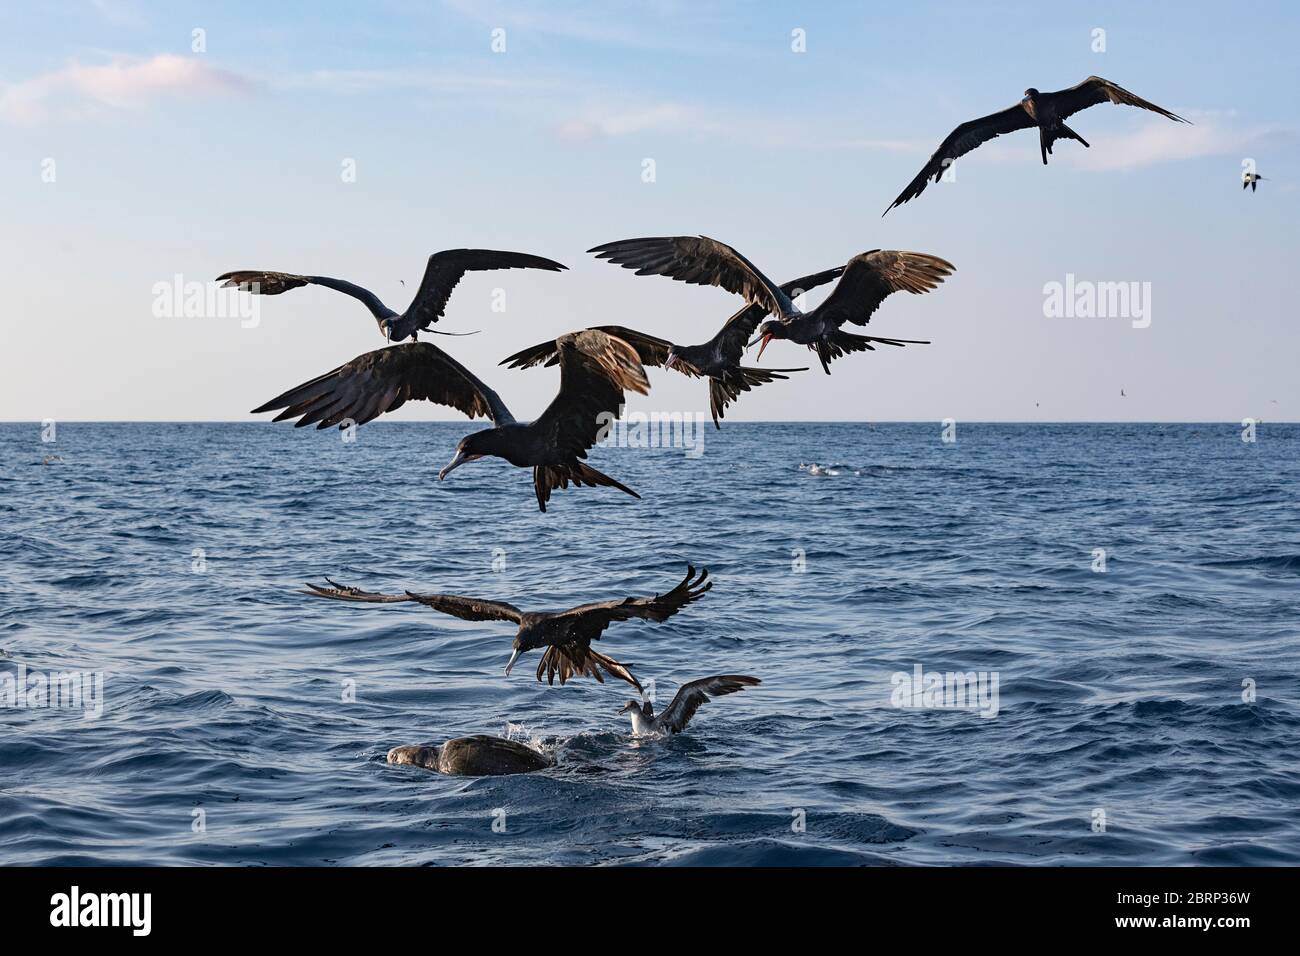 seabirds gather around an olive ridley turtle floating at the surface and try to pick off the baitfish hiding under it, Costa Rica ( Pacific Ocean ) Stock Photo